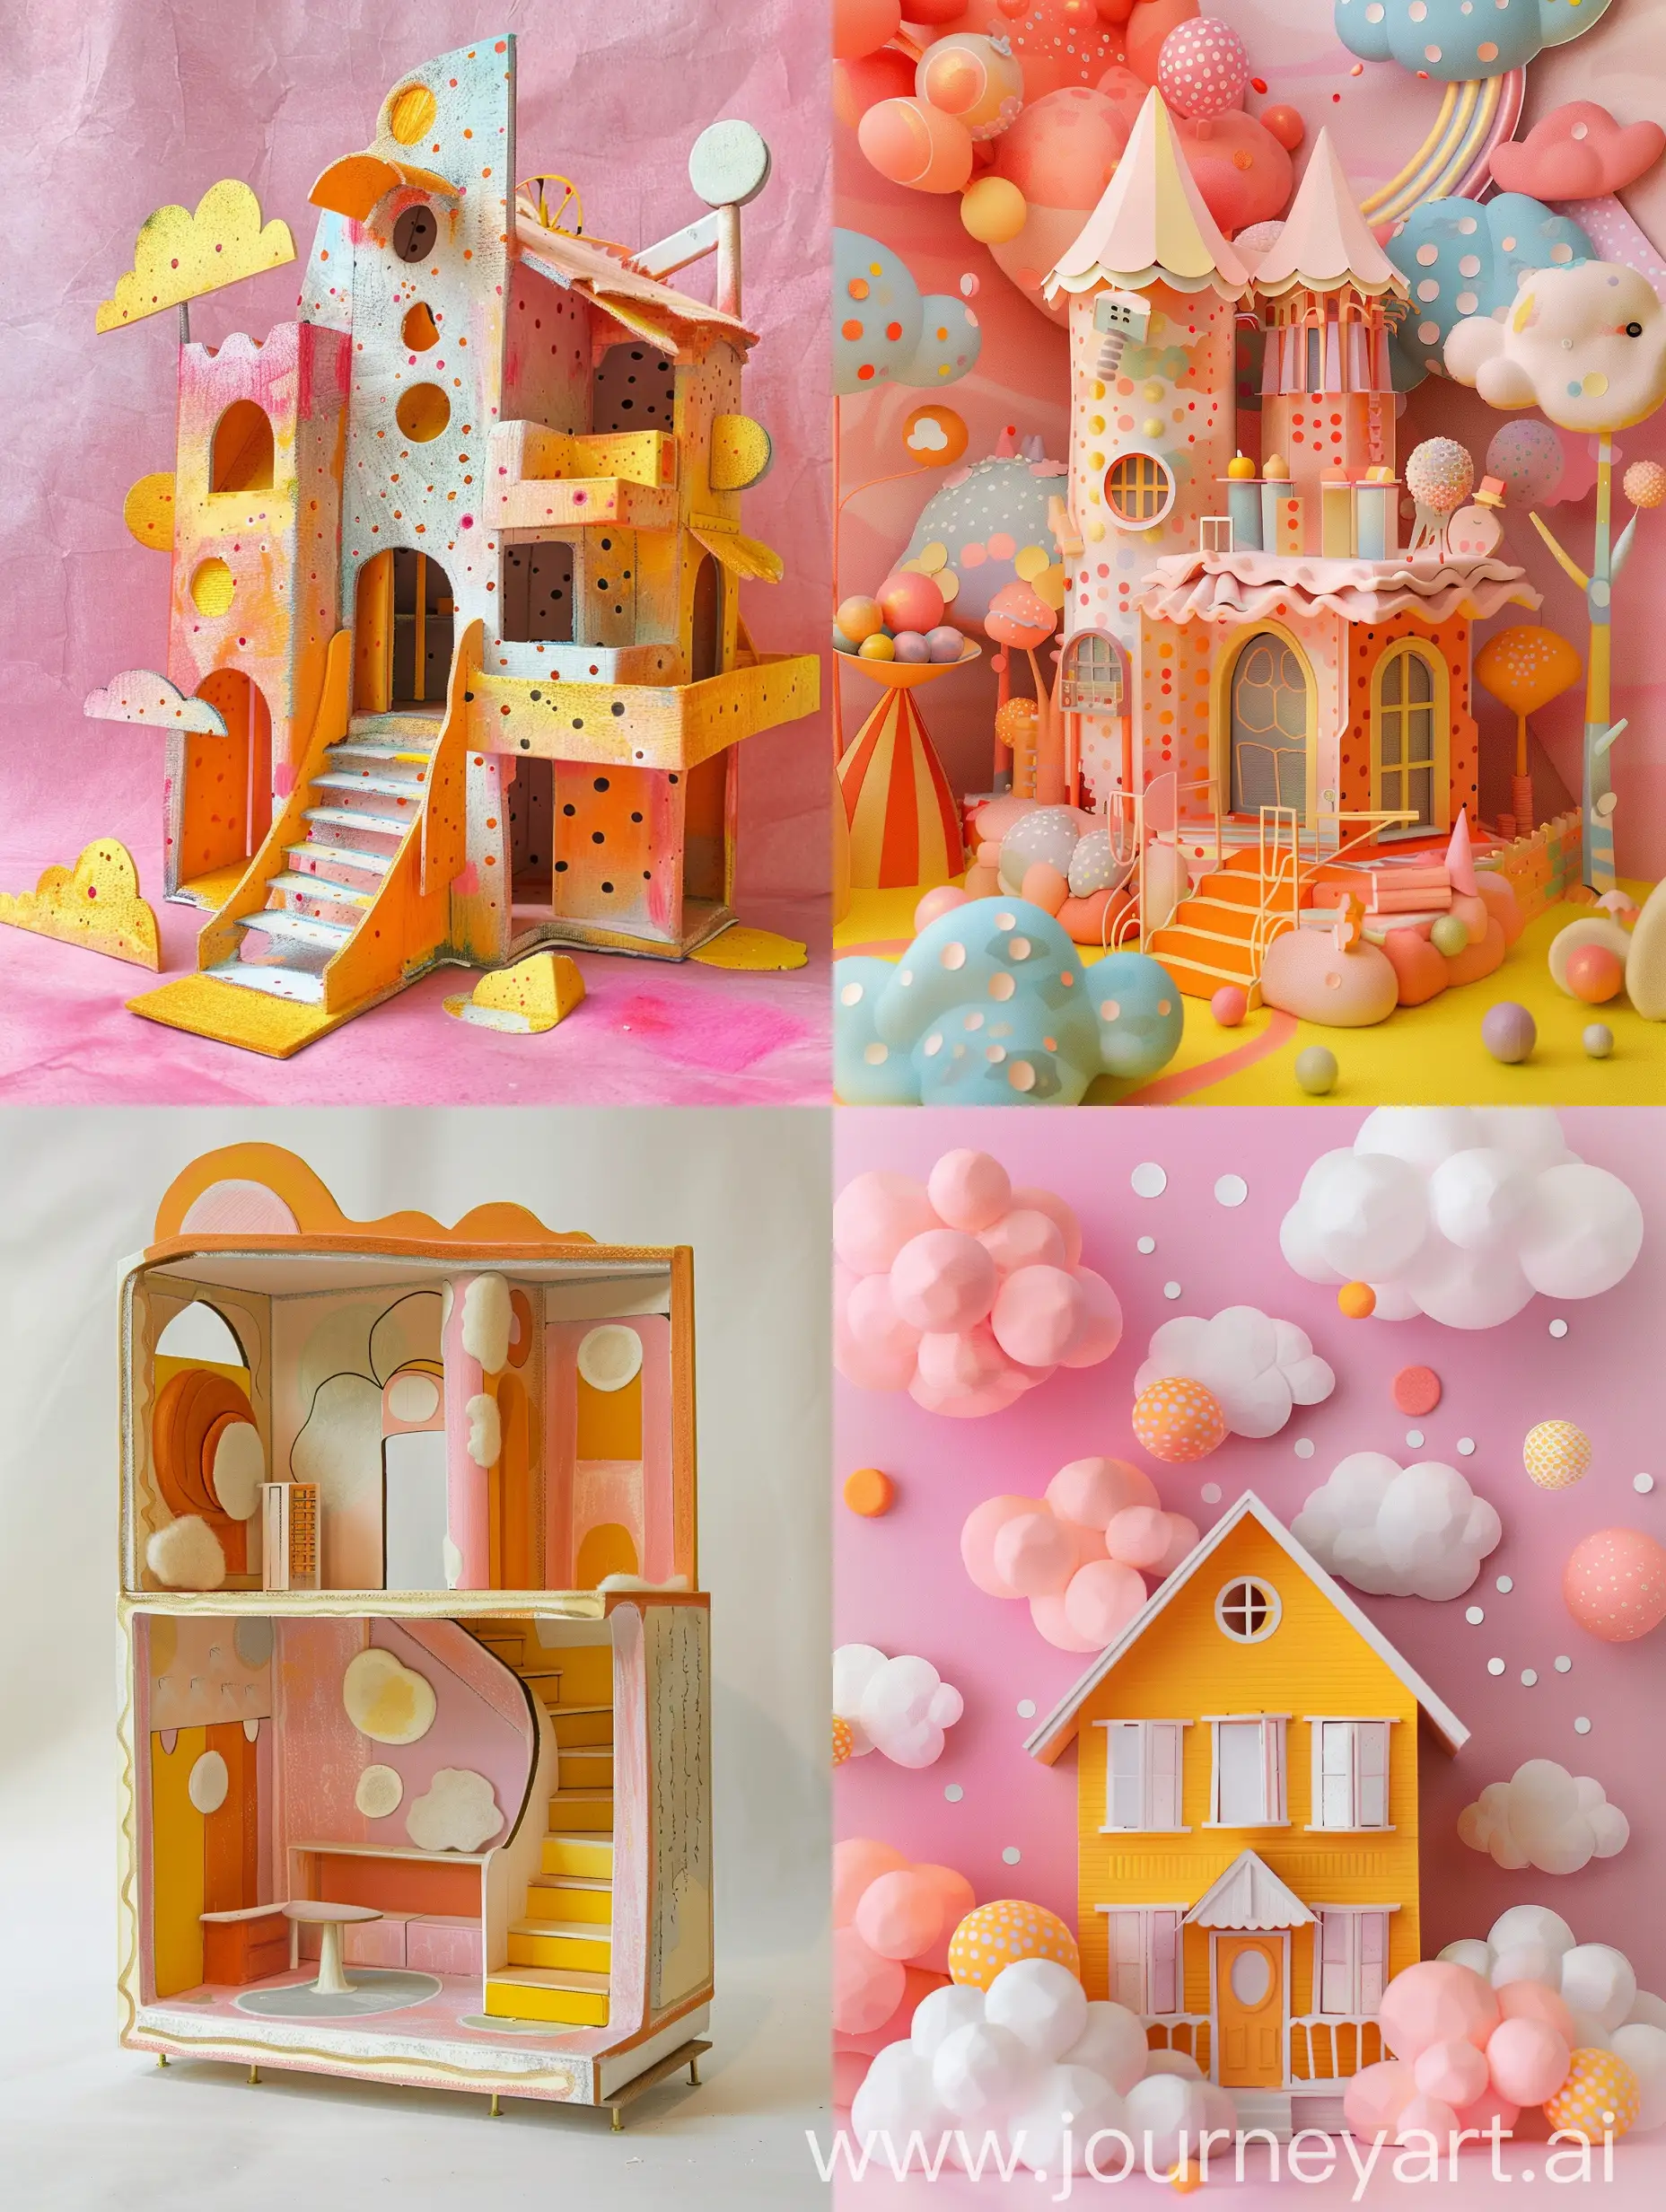 Pastel-Cloud-Dollhouse-Soft-Pink-Yellow-Orange-Colors-with-Dots